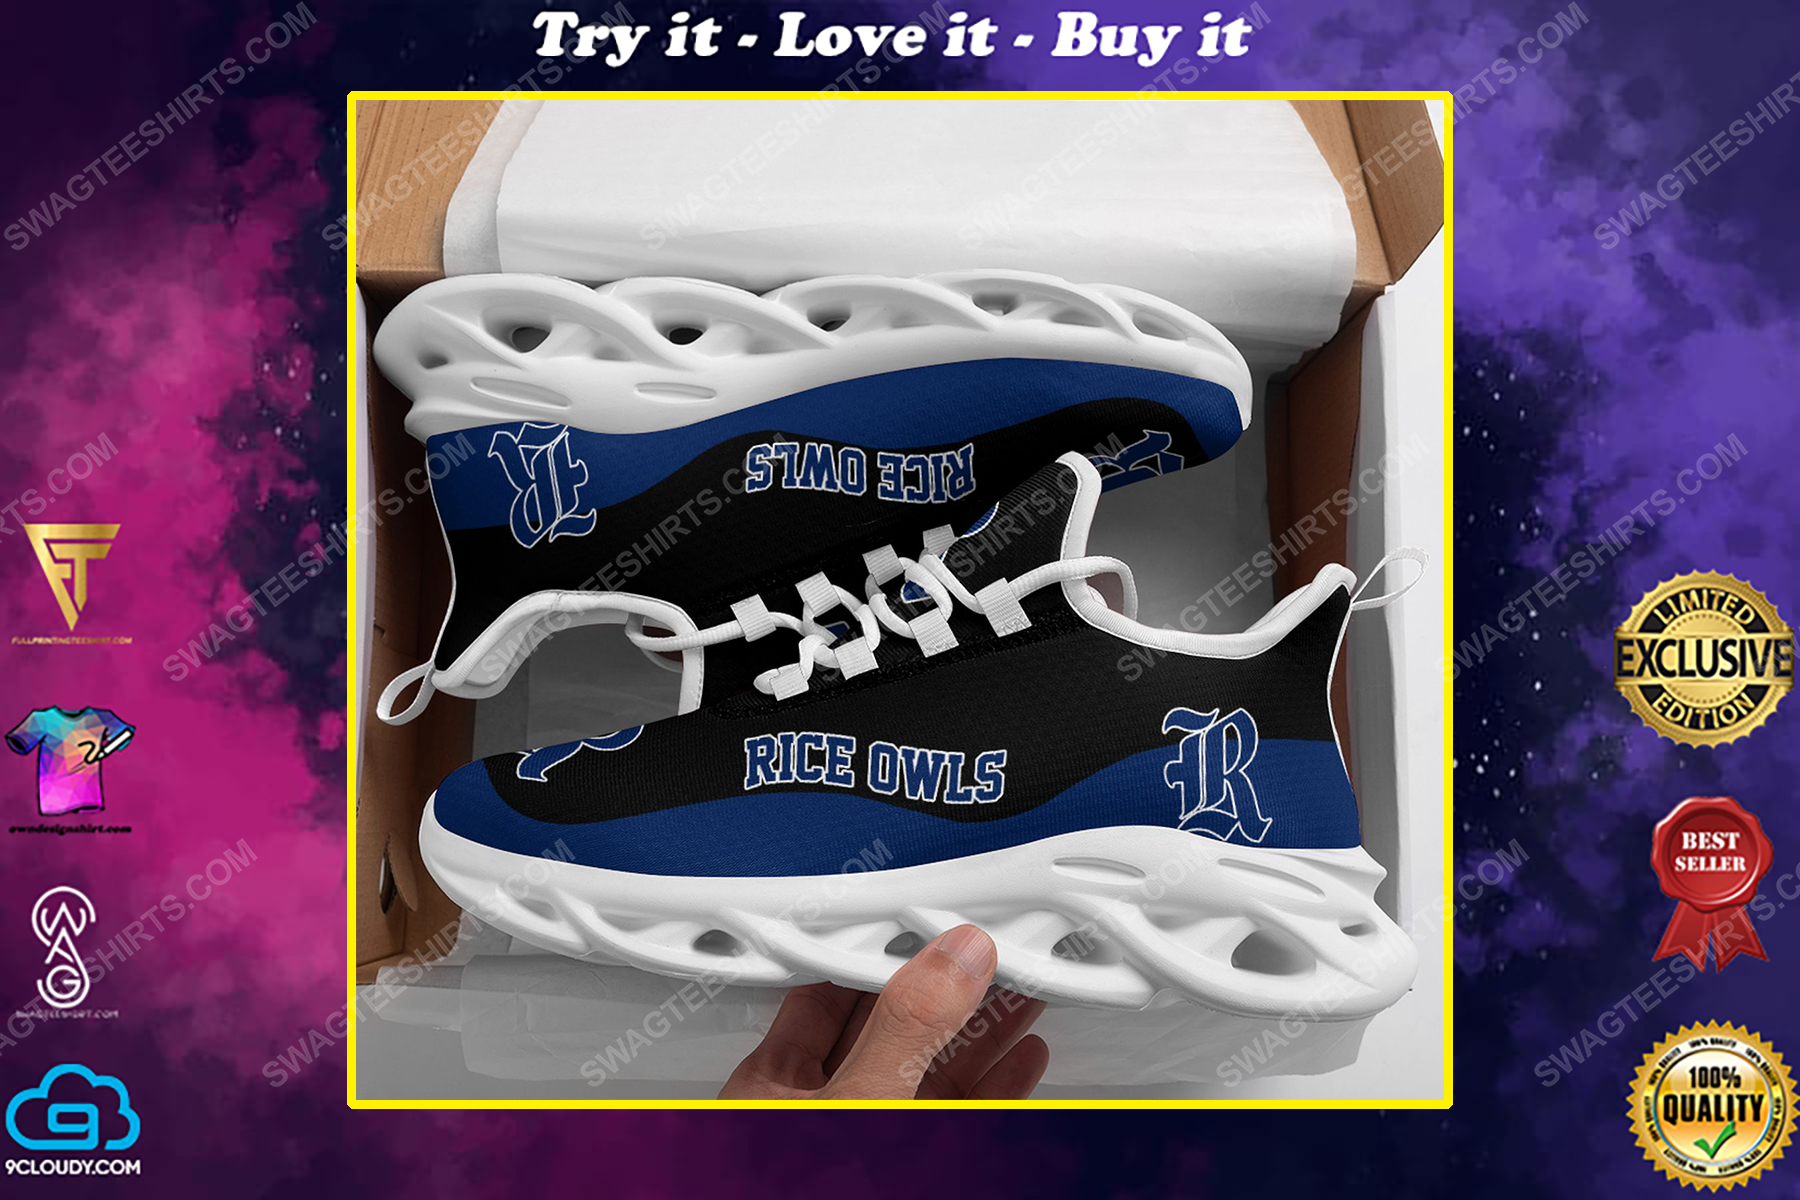 The rice owls football team max soul shoes